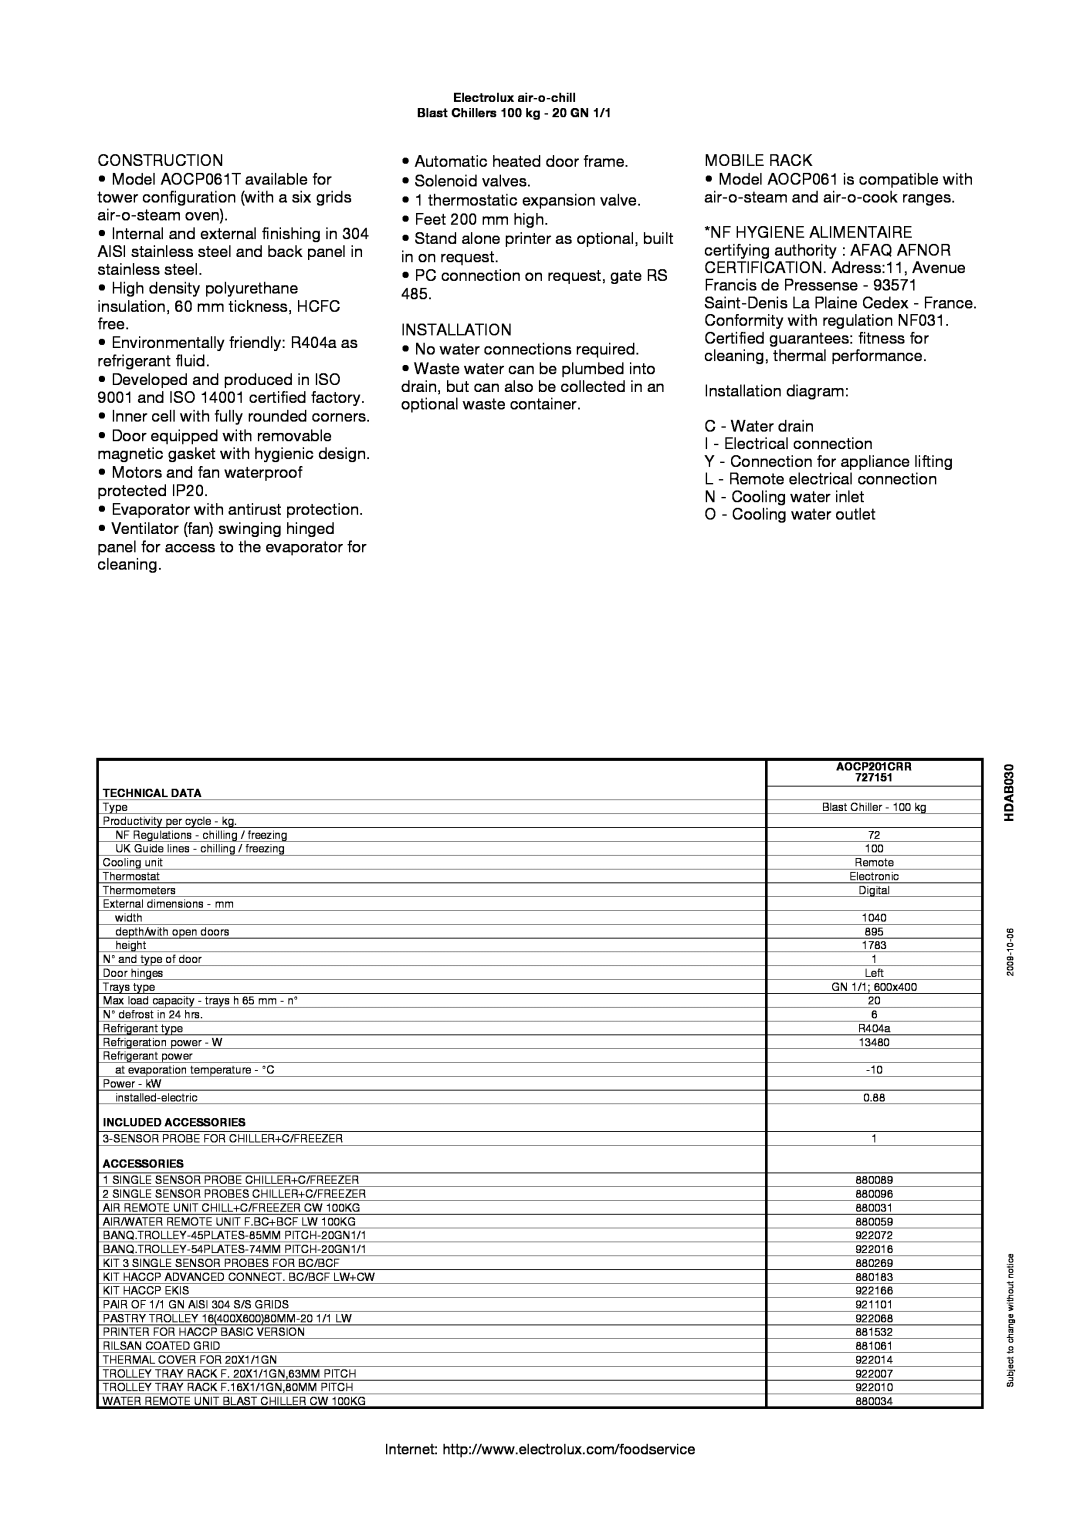 Electrolux AOCP061T, 727151, AOCP201CRR manual Construction 